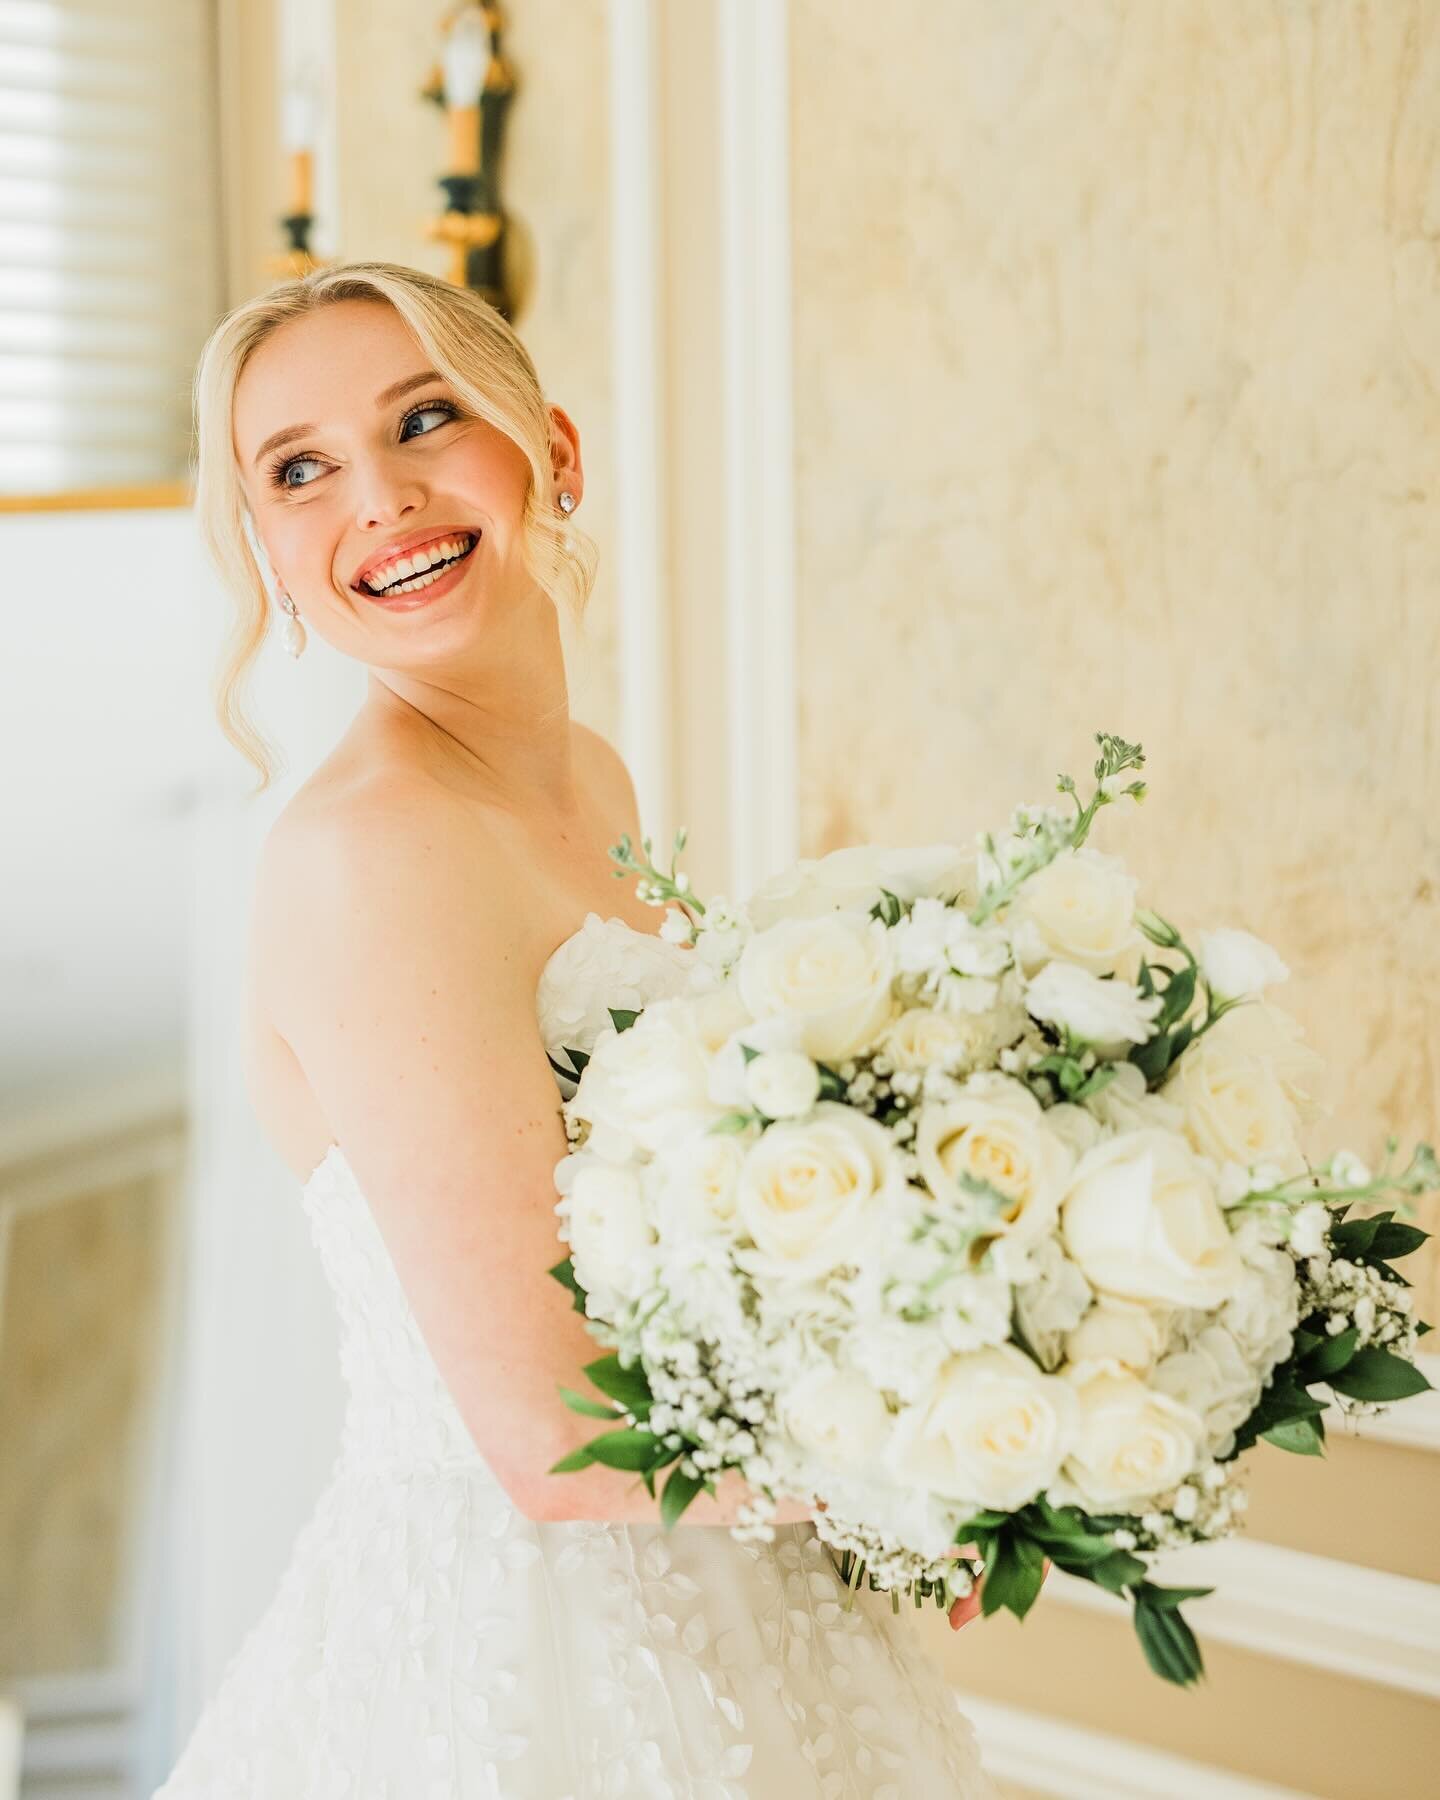 When we&rsquo;re gifted a gallery link from our brides, it takes me right back to the day we spent getting her ready, Megan is a literal angel. She was so calm, joyful and kind. She was so ready to start the best day ever. 

Congratulations Megan &am